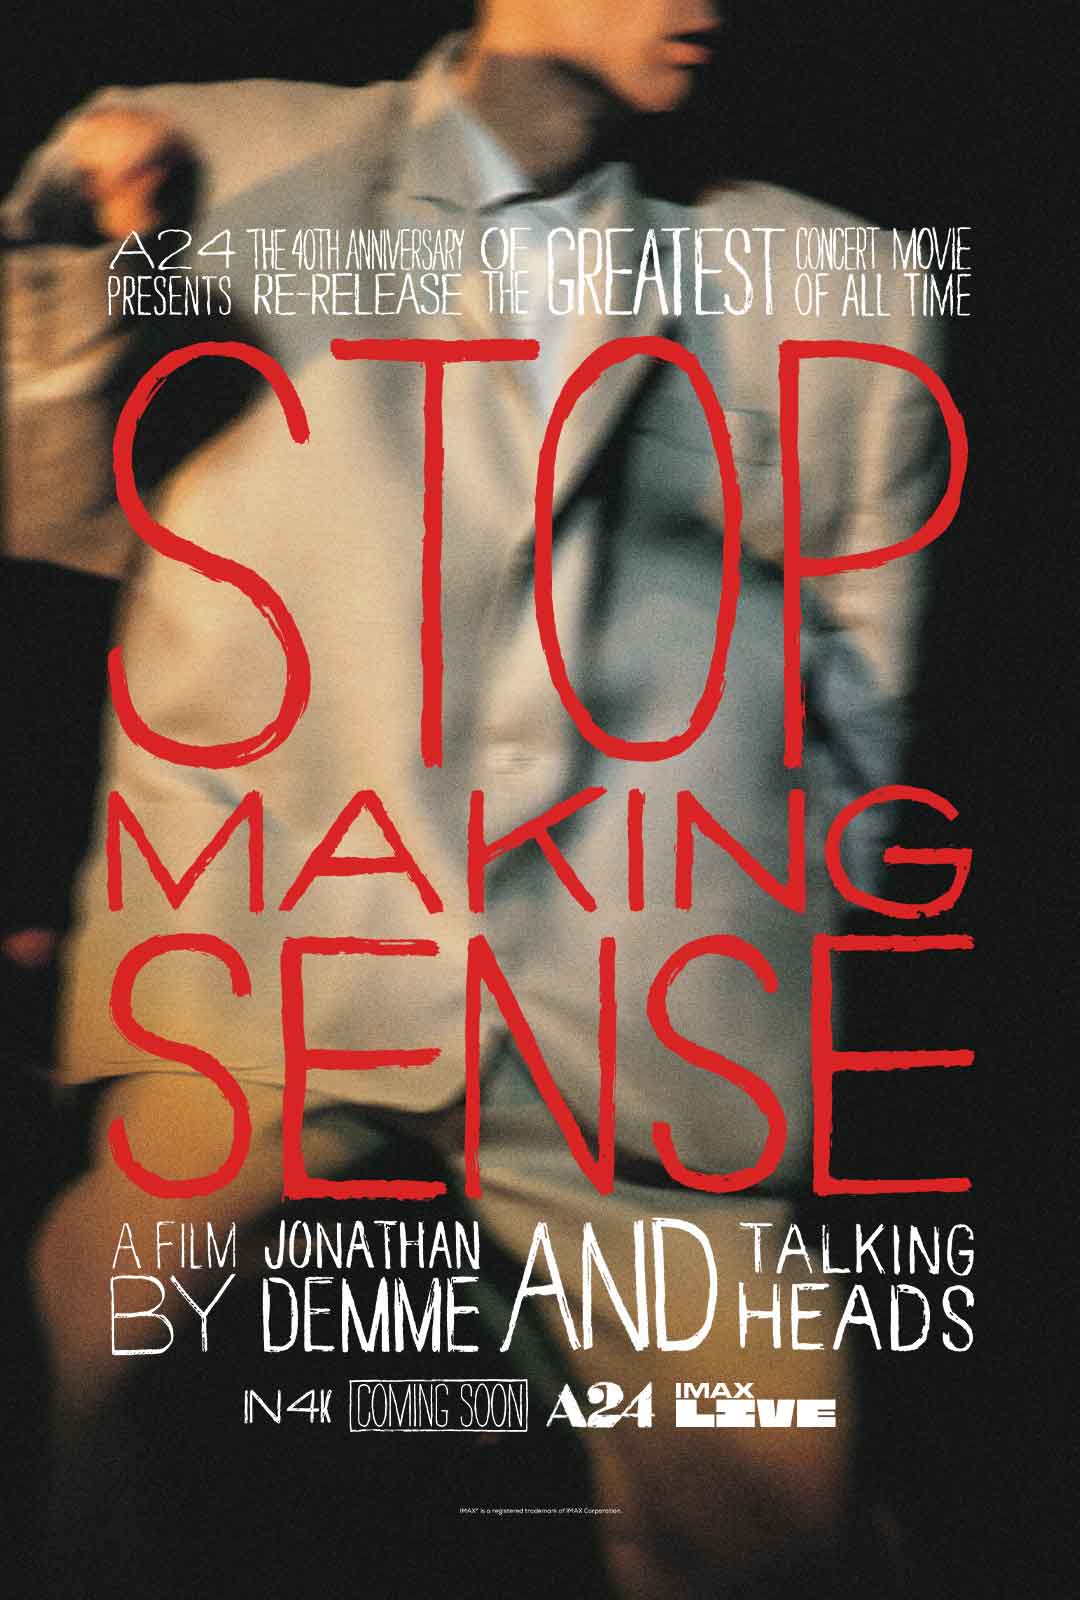 David Byrne on the cover of Stop Making Sense